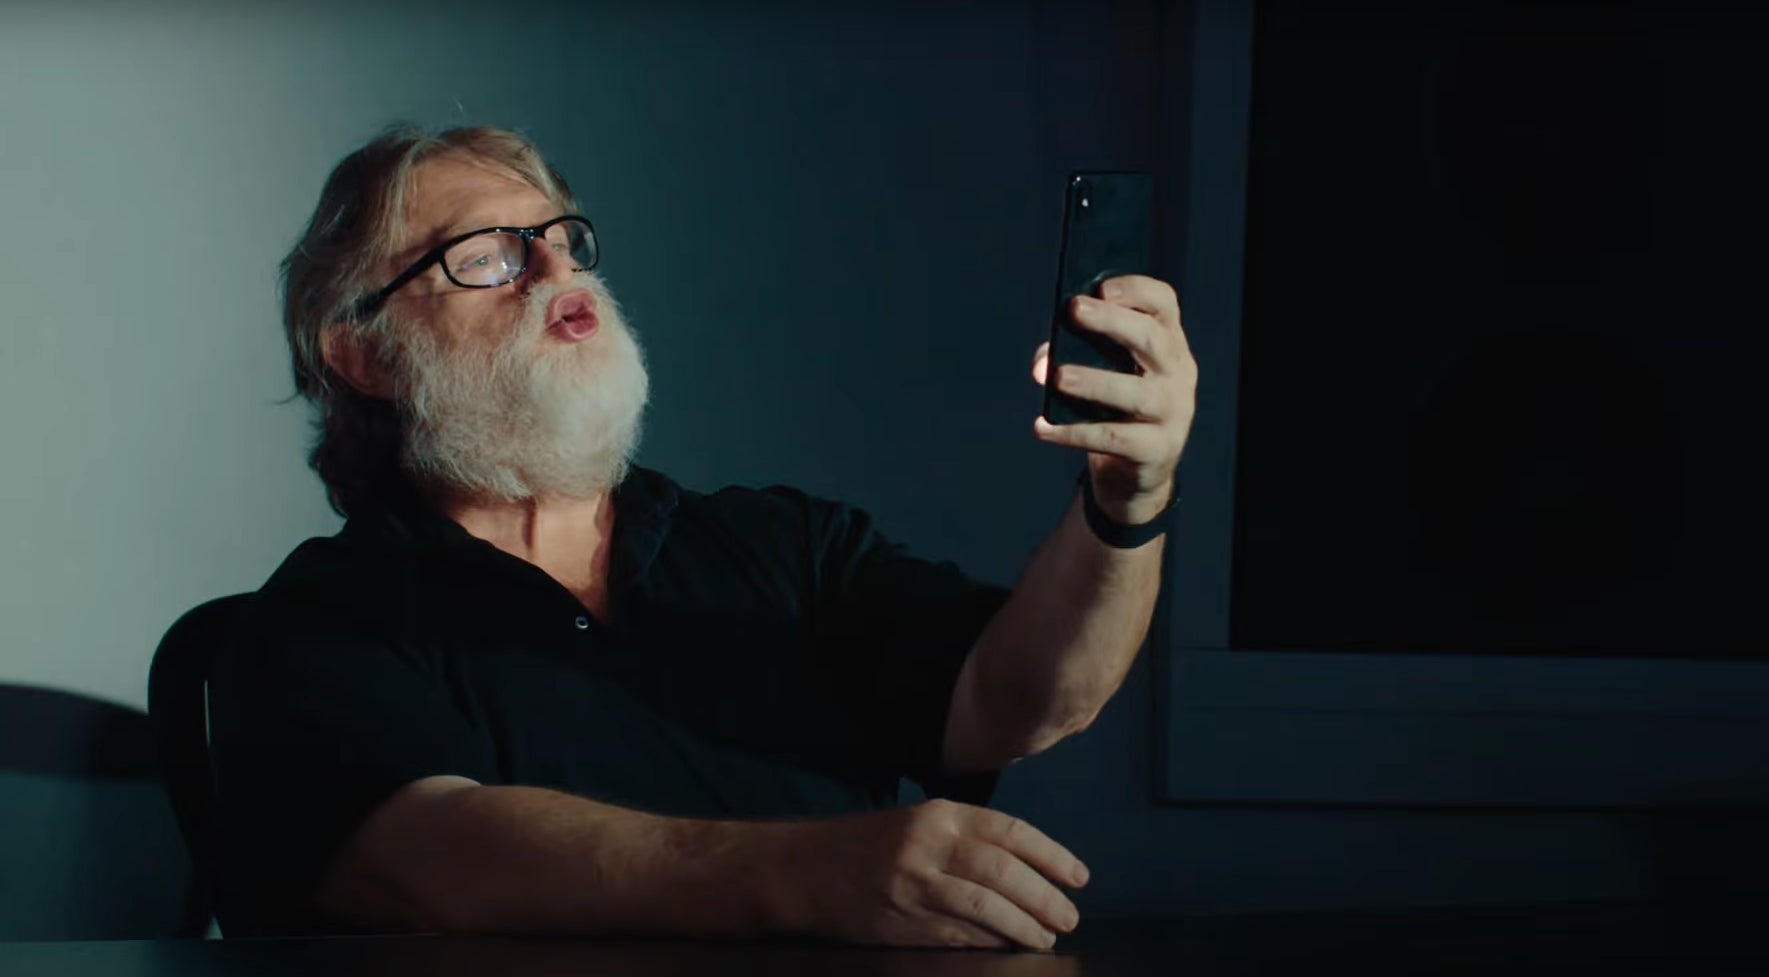 Gabe Newell takes a selfie in an advert for a Dota 2 Cave Johnson announcer pack.